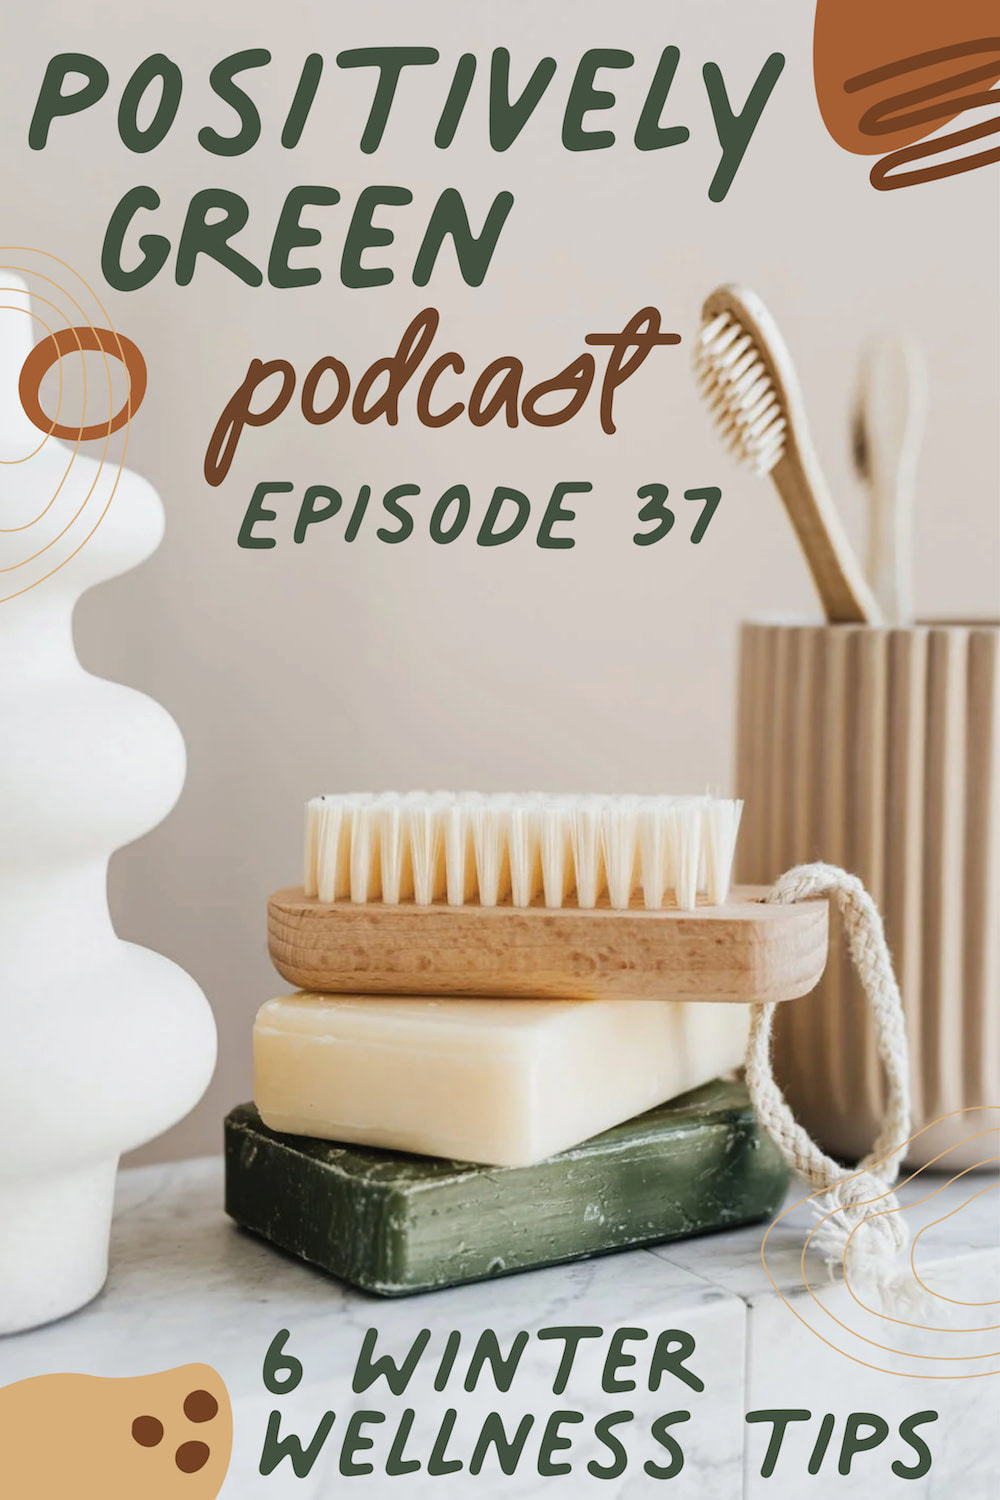 The Positively Green Podcast Episode 37 Six Winter Wellness Tips